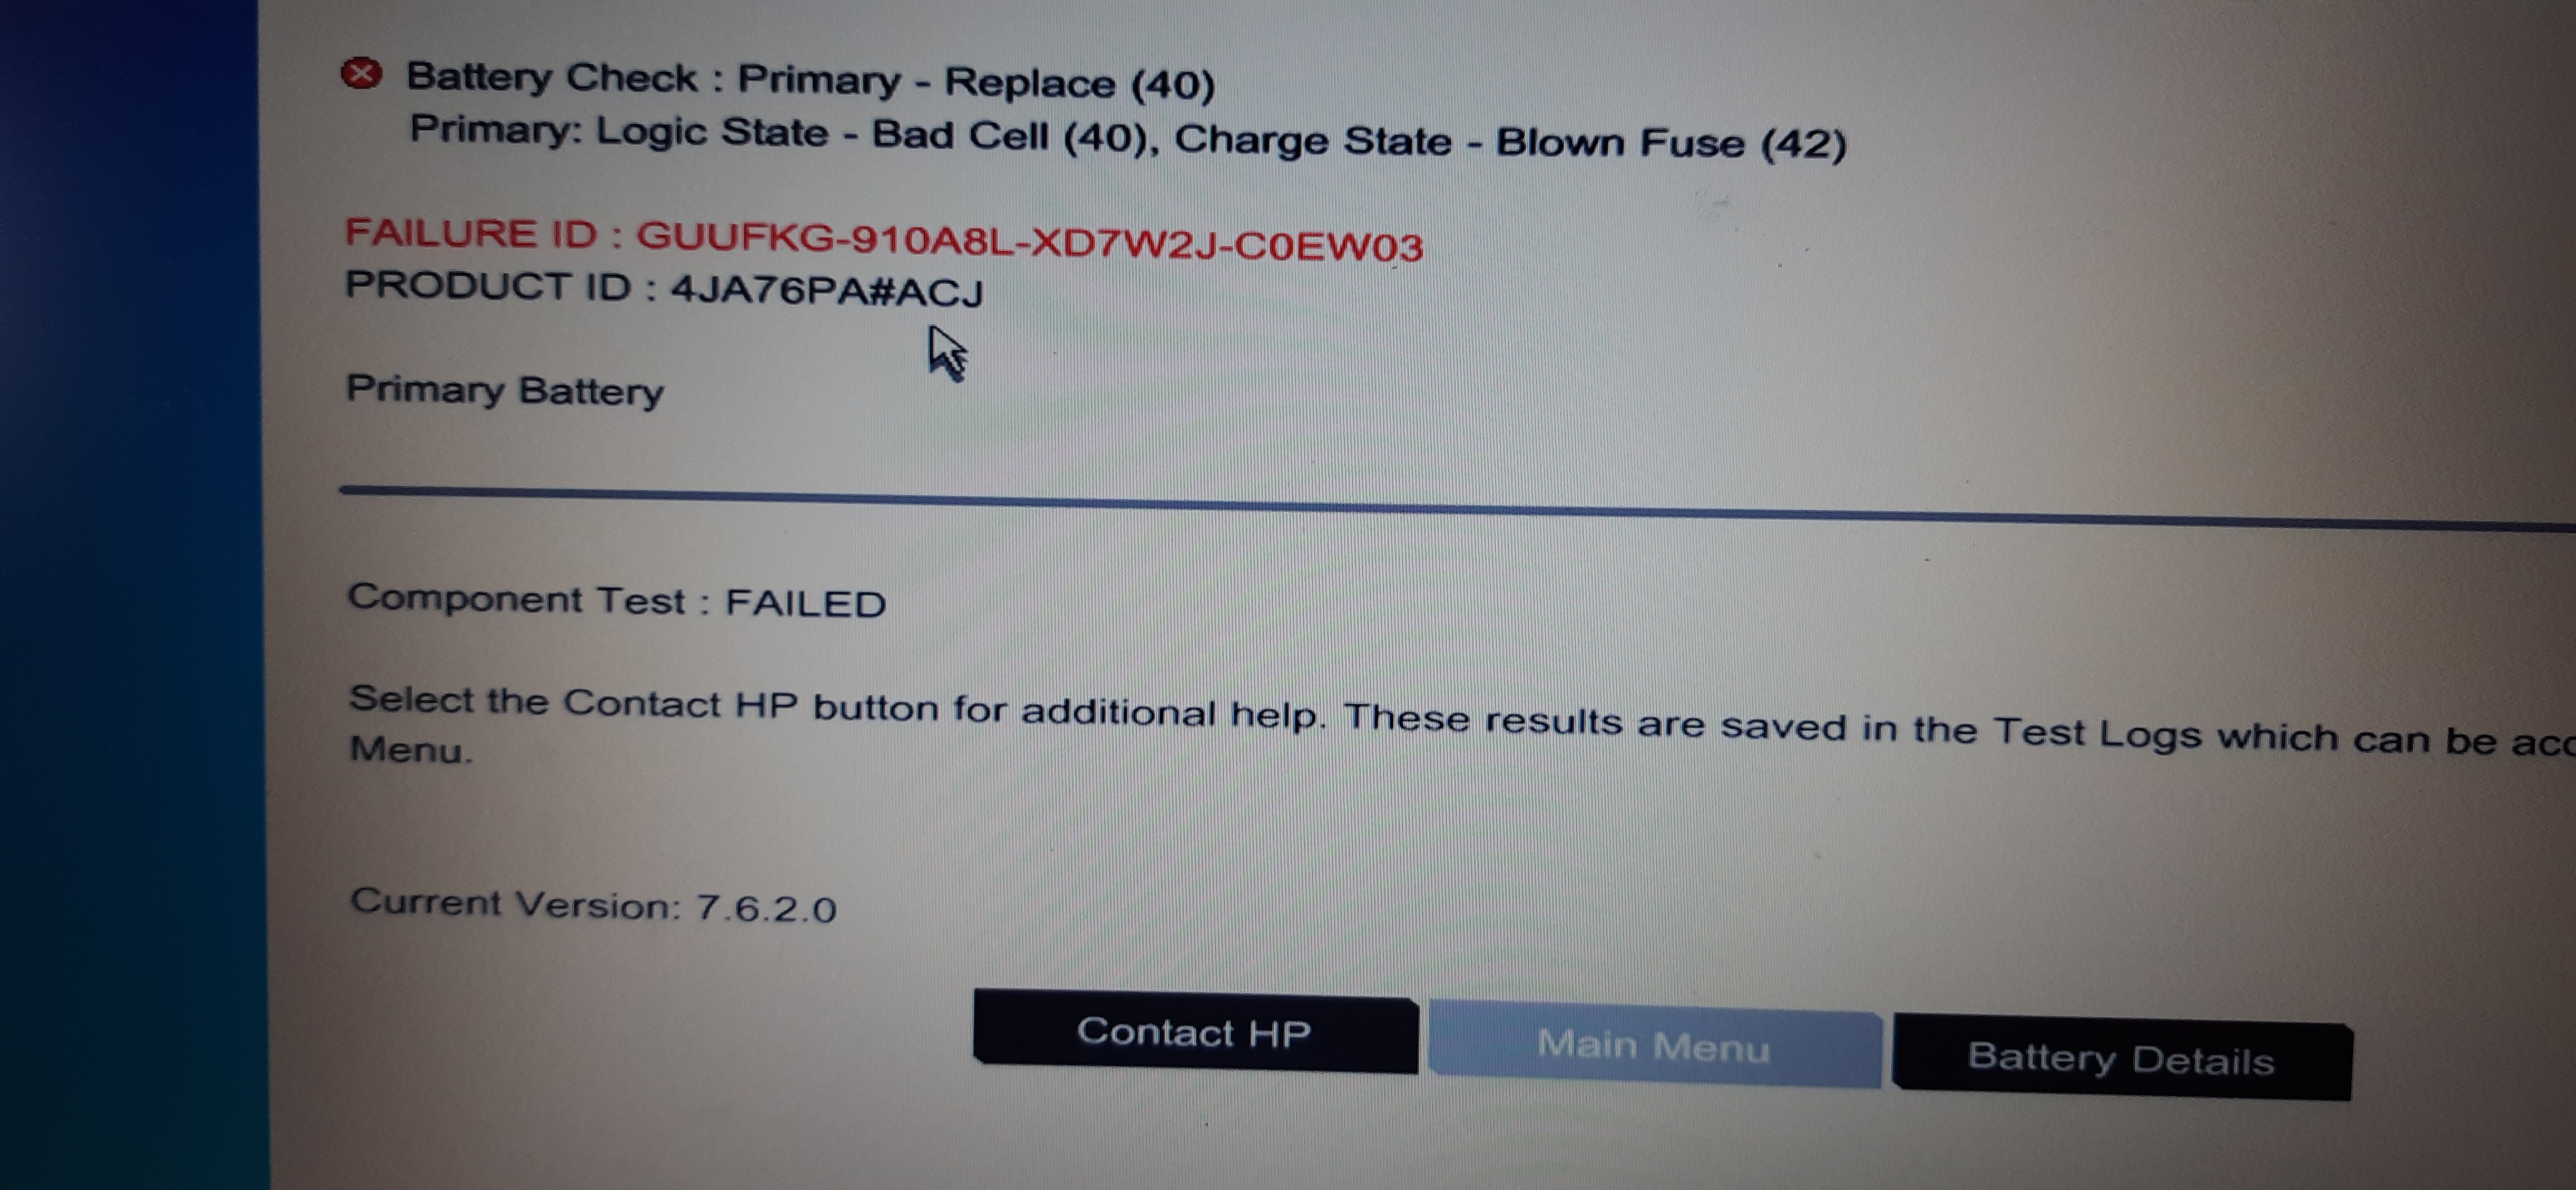 Battery charging issue - HP Support Community - 7797333